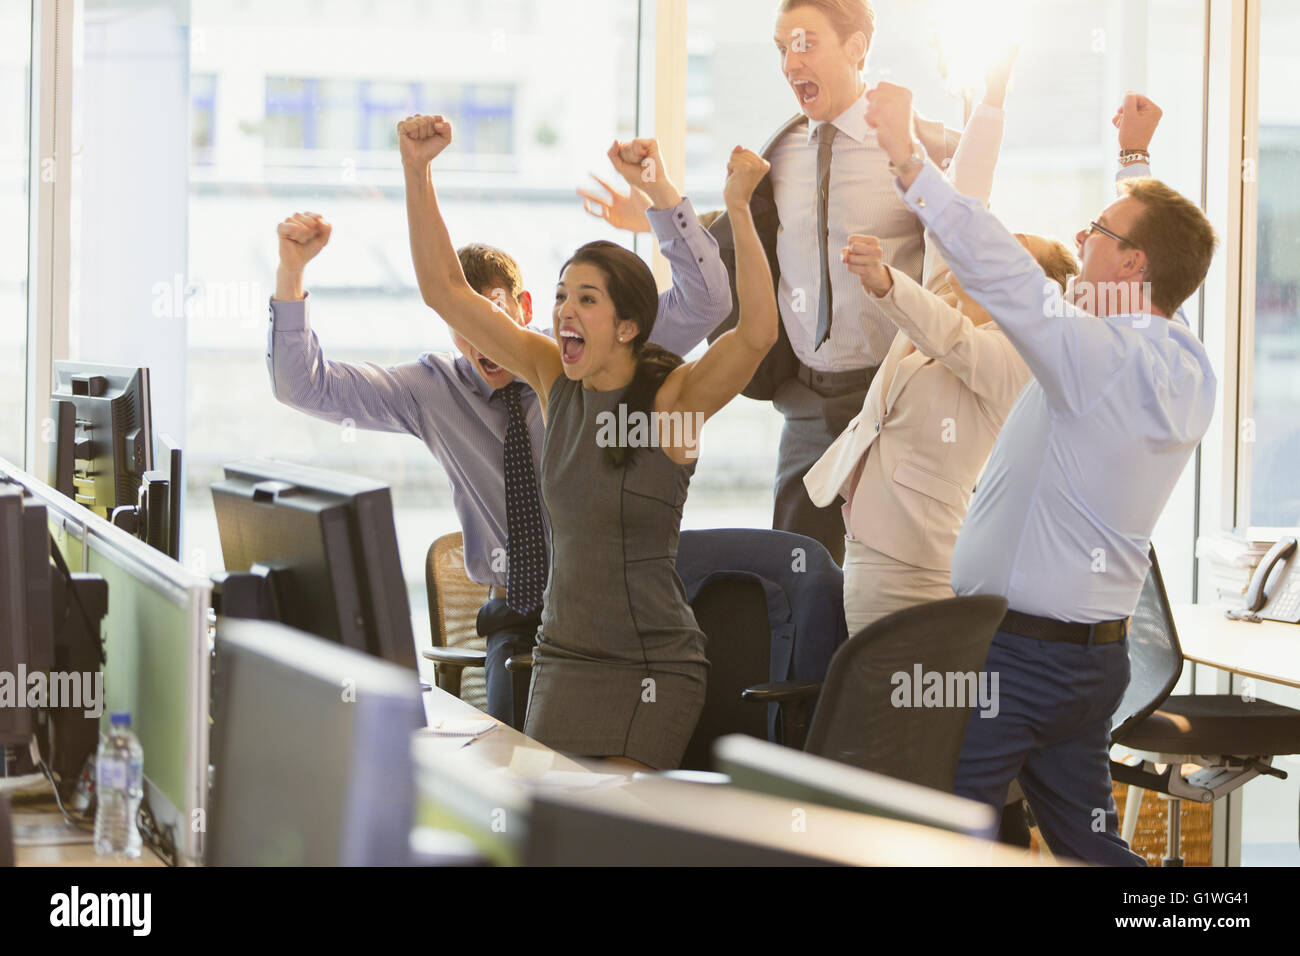 Exuberant business people cheering with arms raised in office Stock Photo